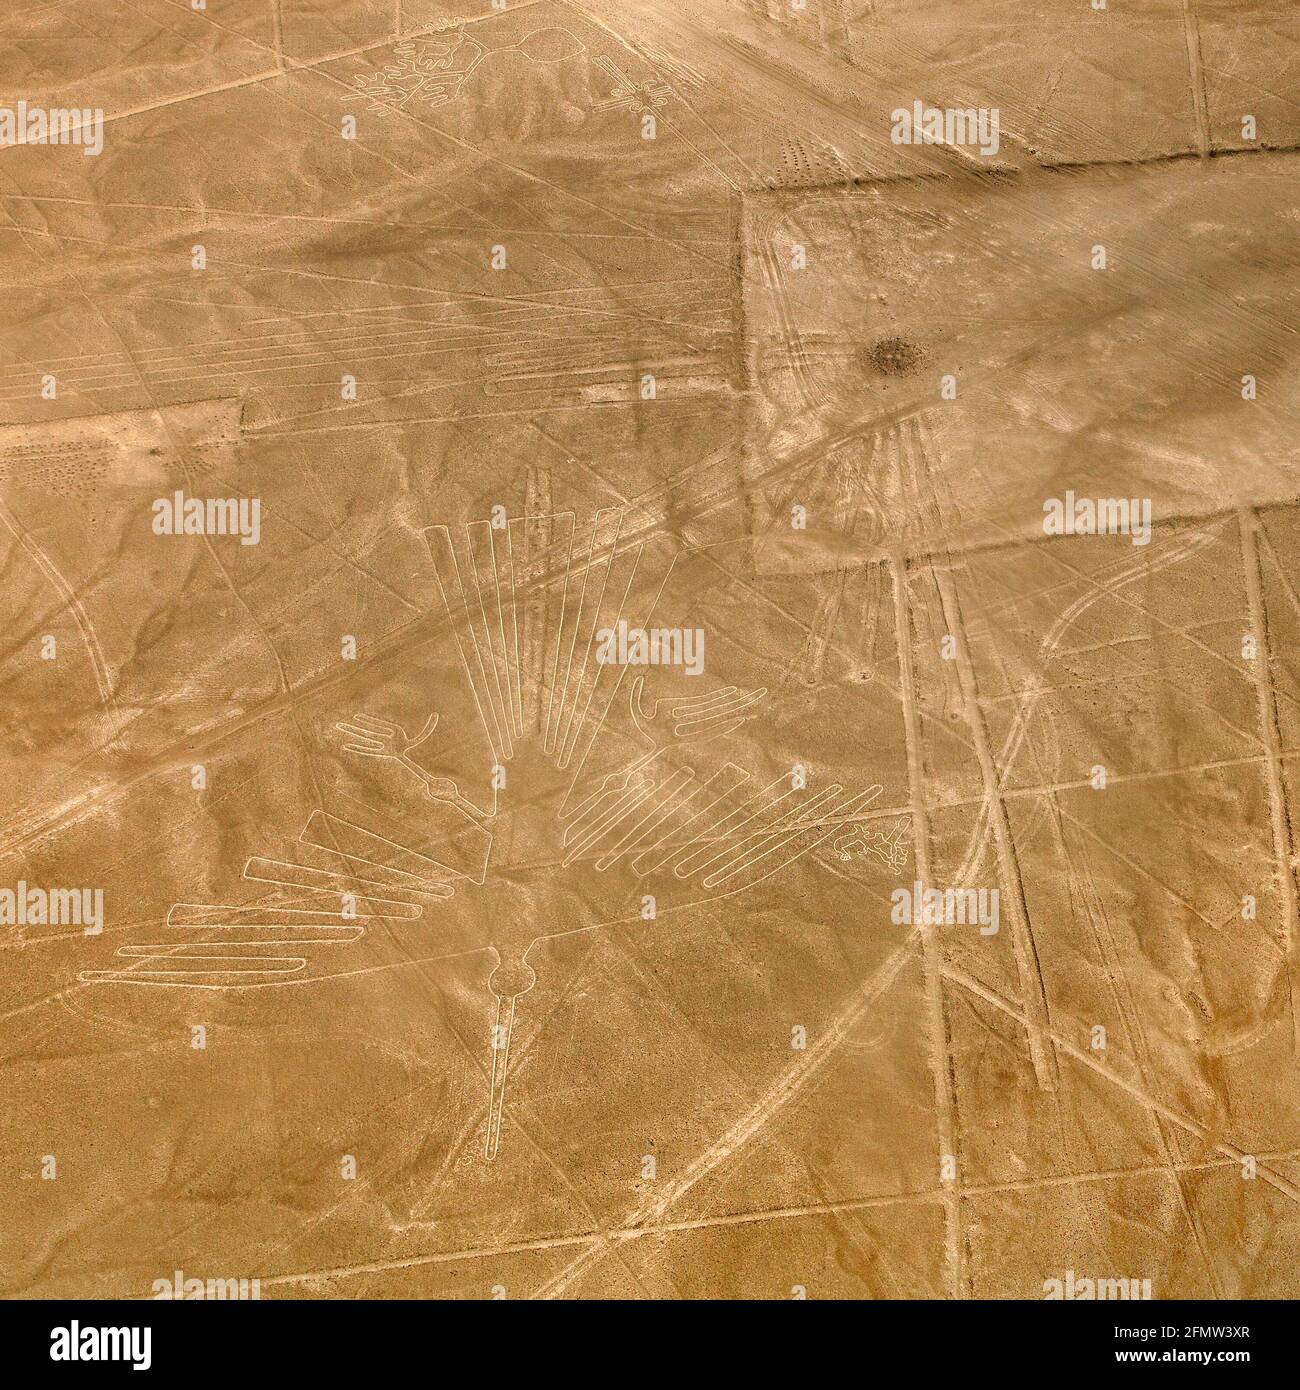 Condor geoglyph, Nazca mysterious lines and geoglyphs aerial view sepia colored, landmark in Peru Stock Photo